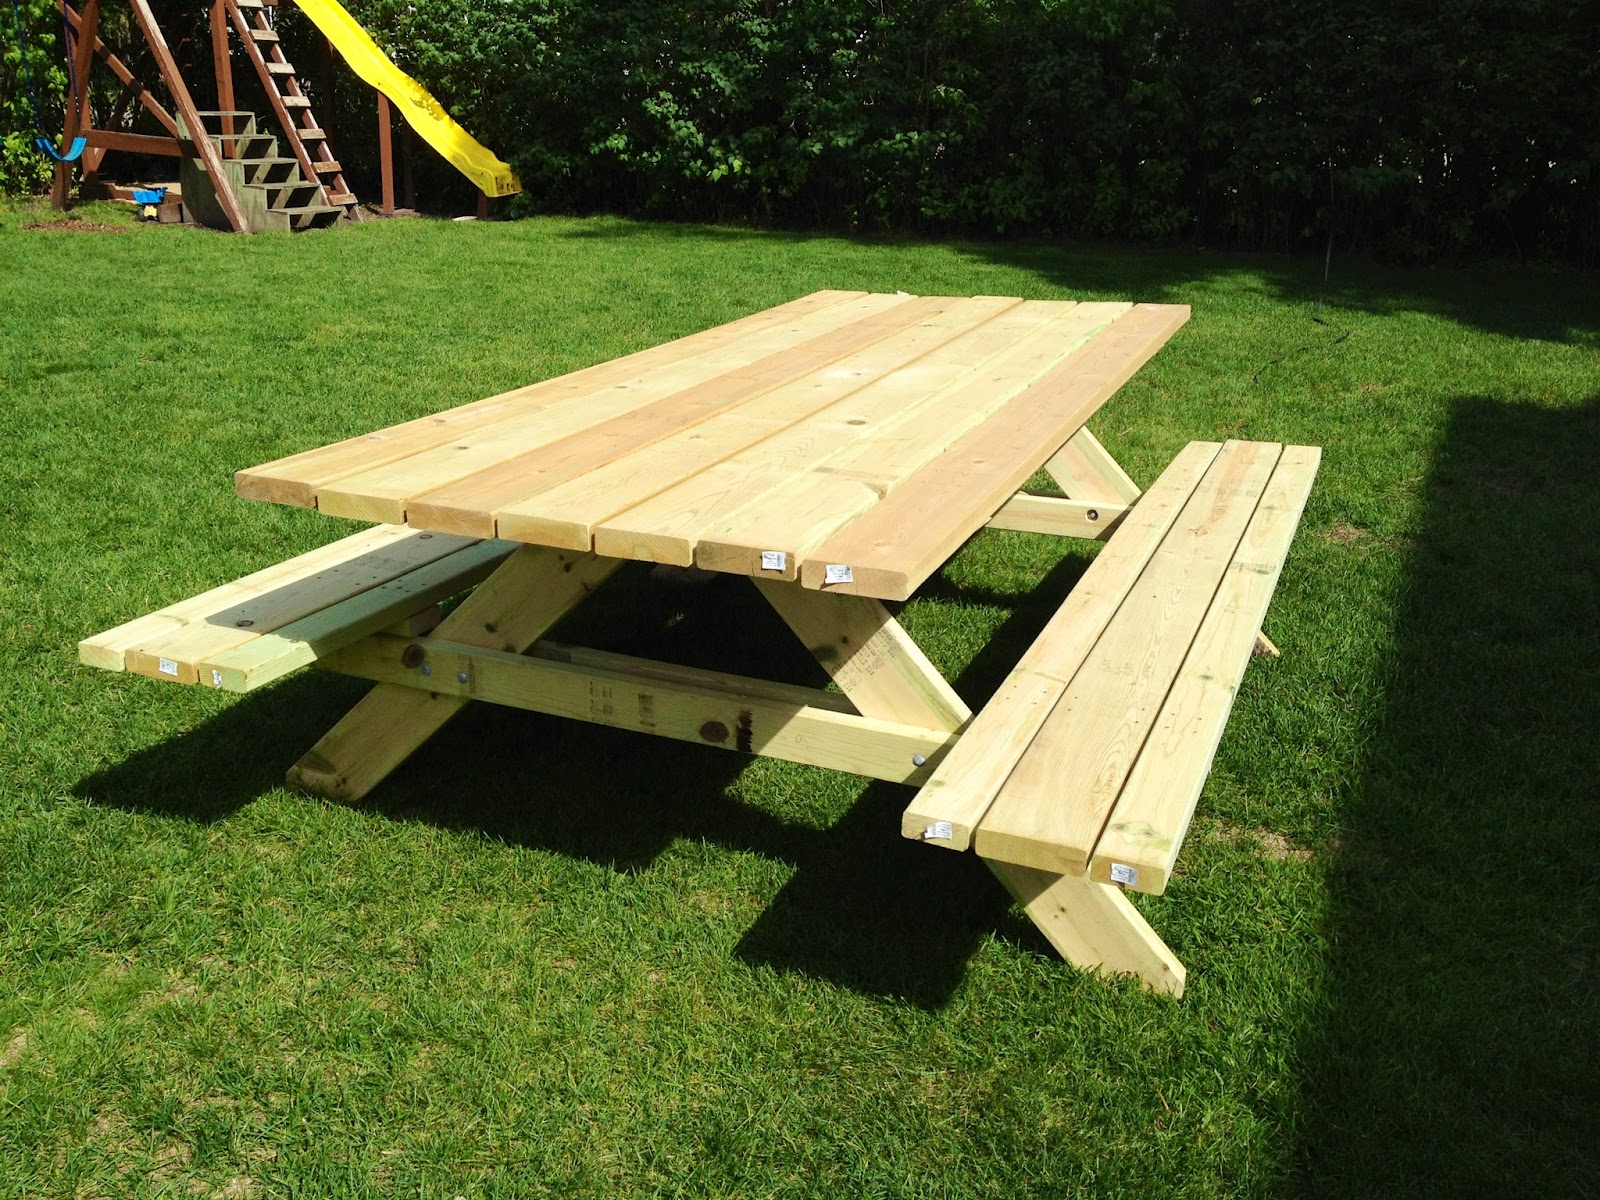  picnic table from some plans I found on the internet . Great idea